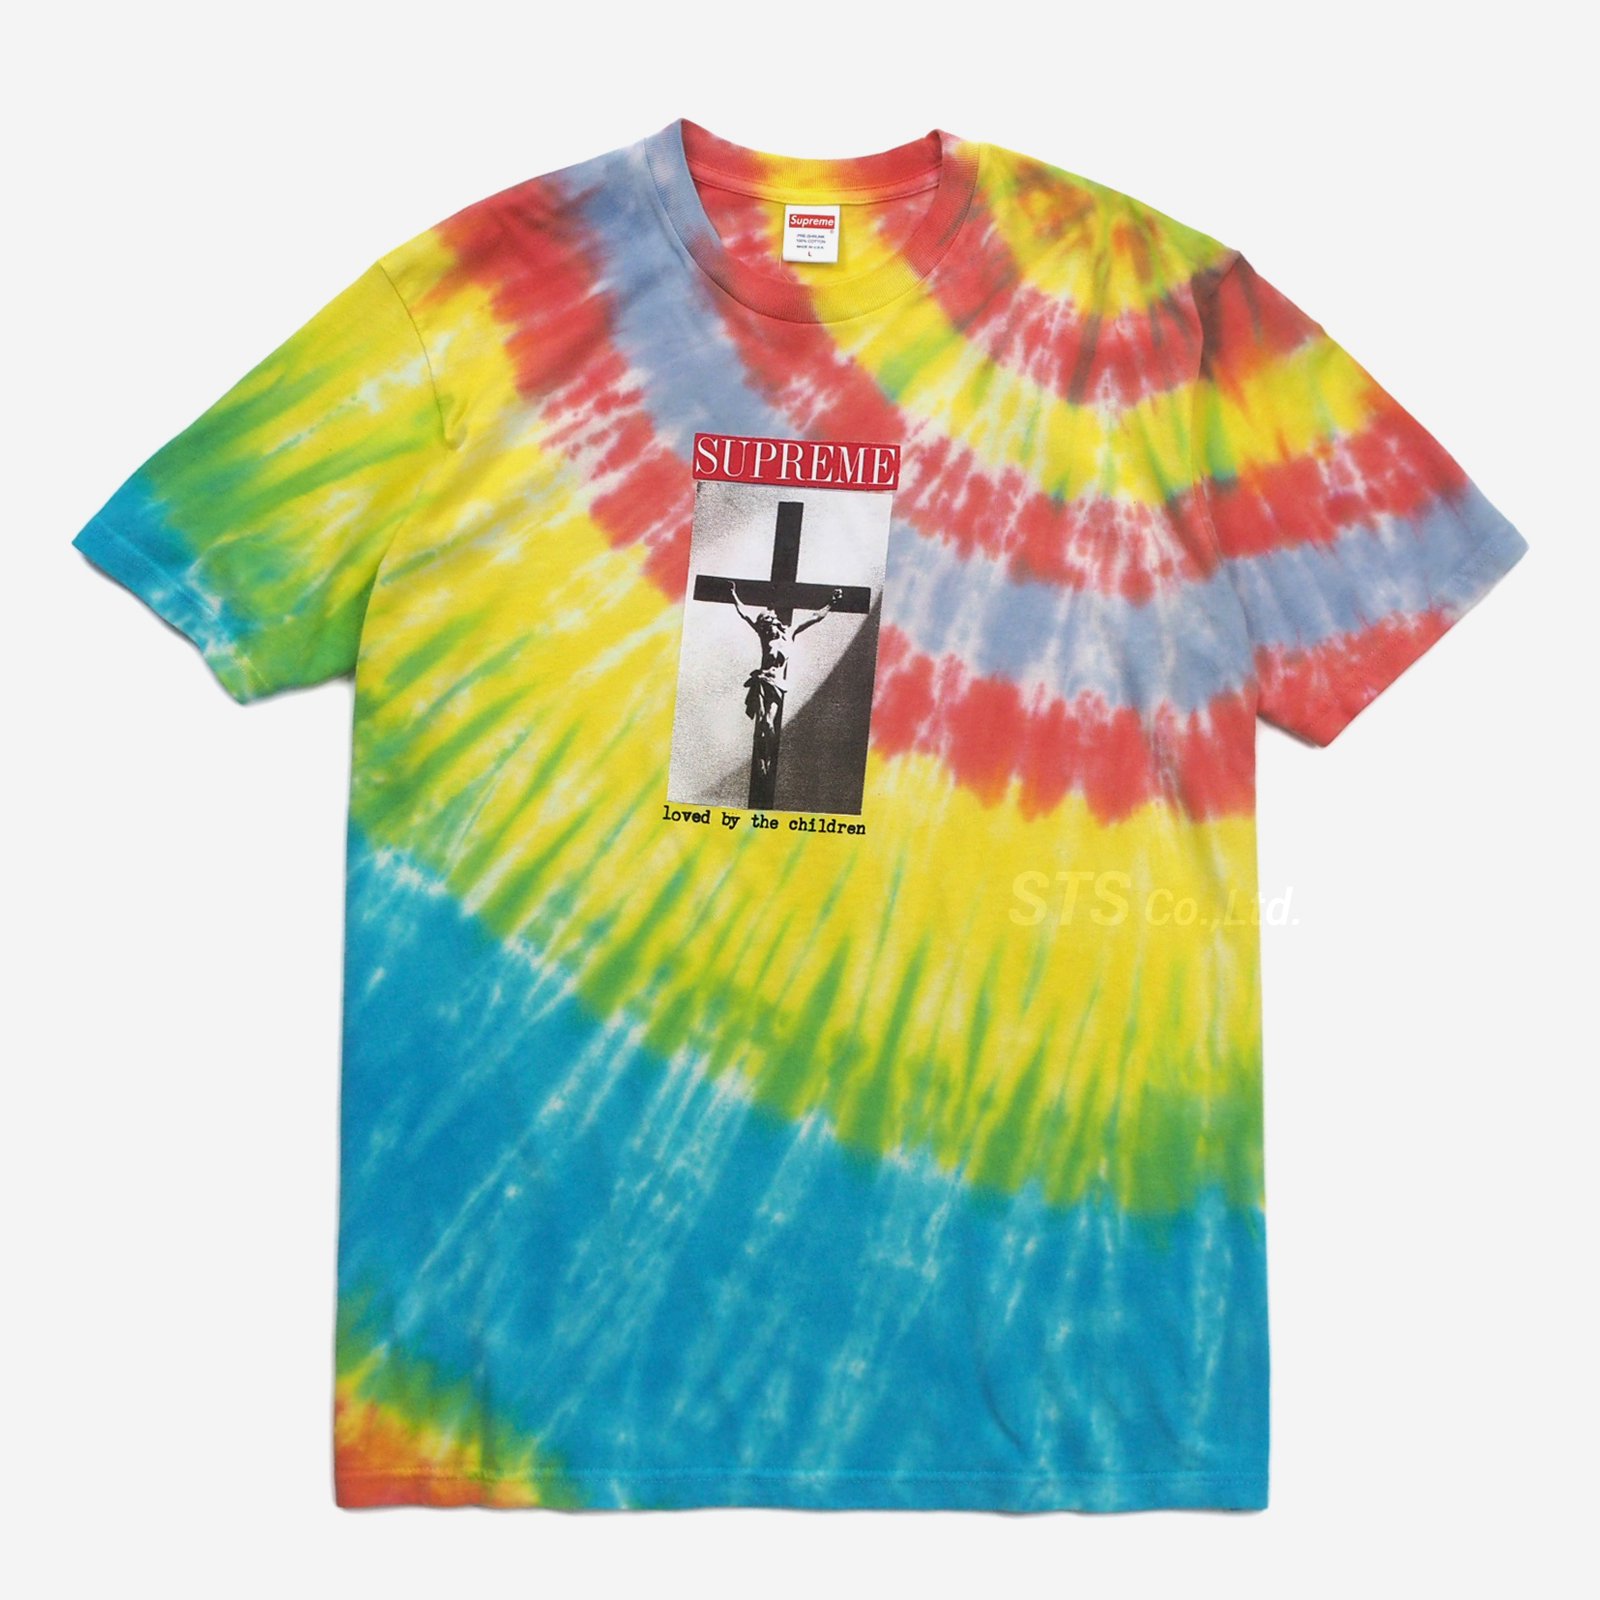 Supreme - Loved By The Children Tee - ParkSIDER